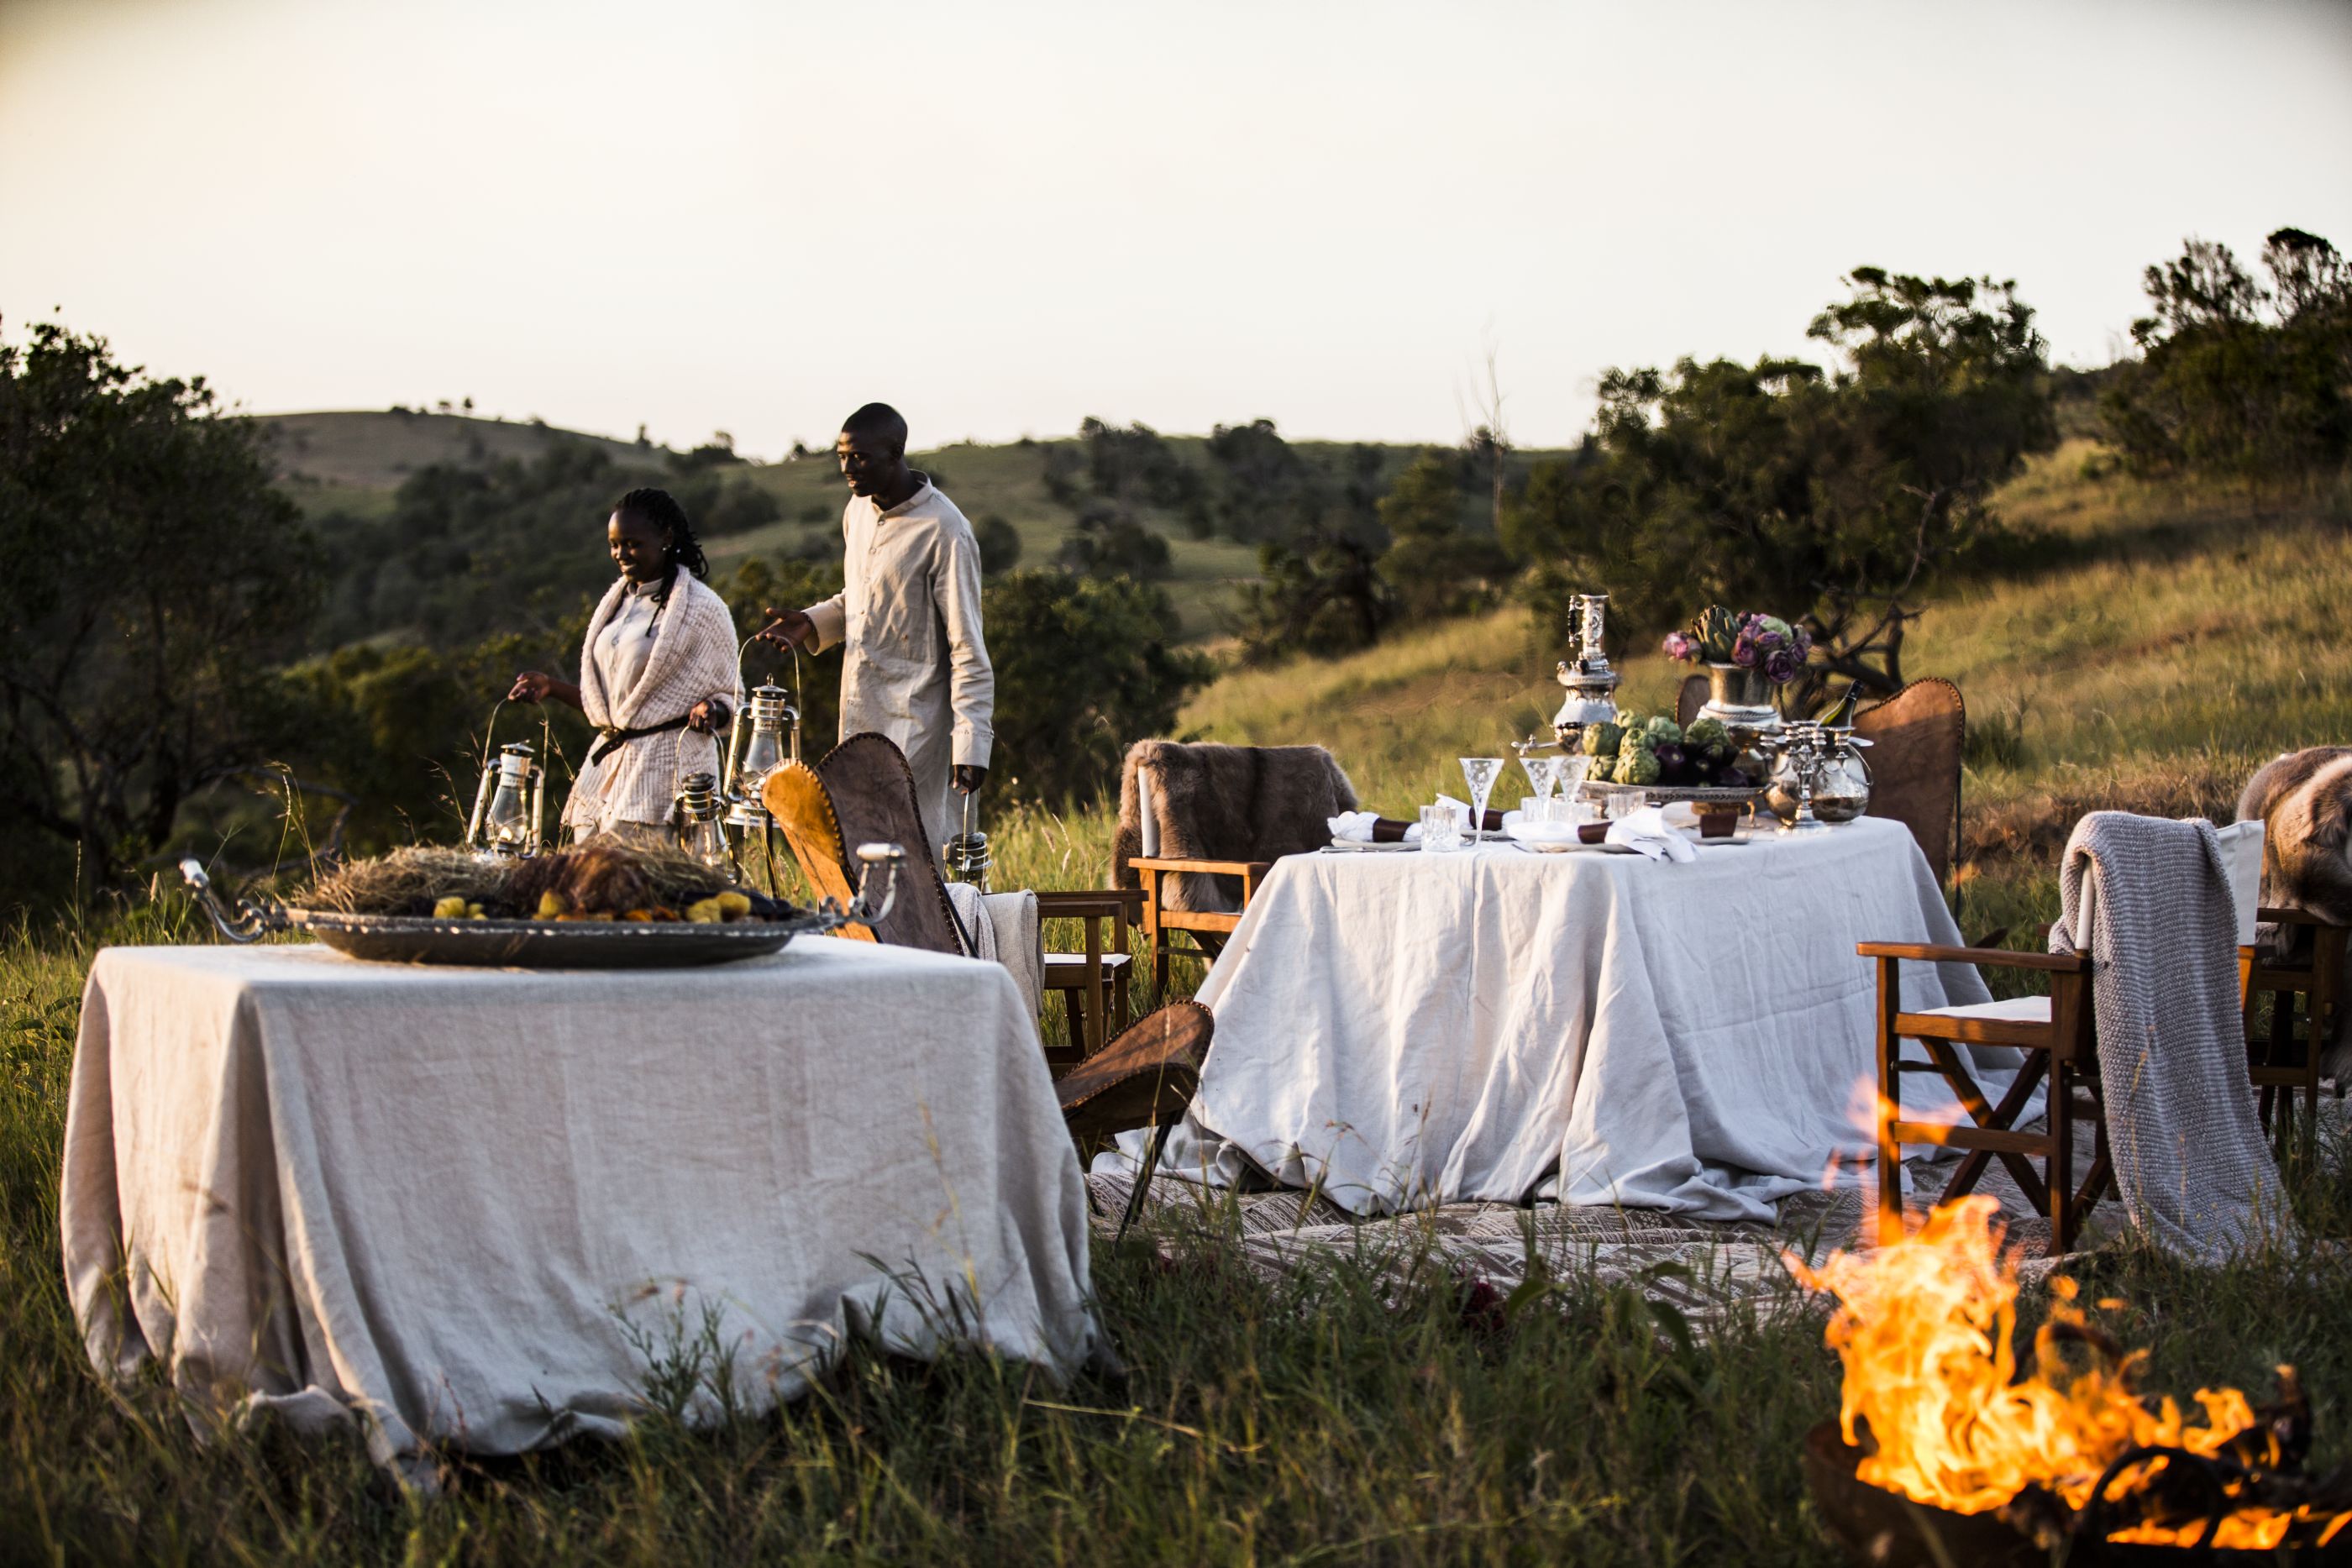 Sundowners and dining out, Kenya